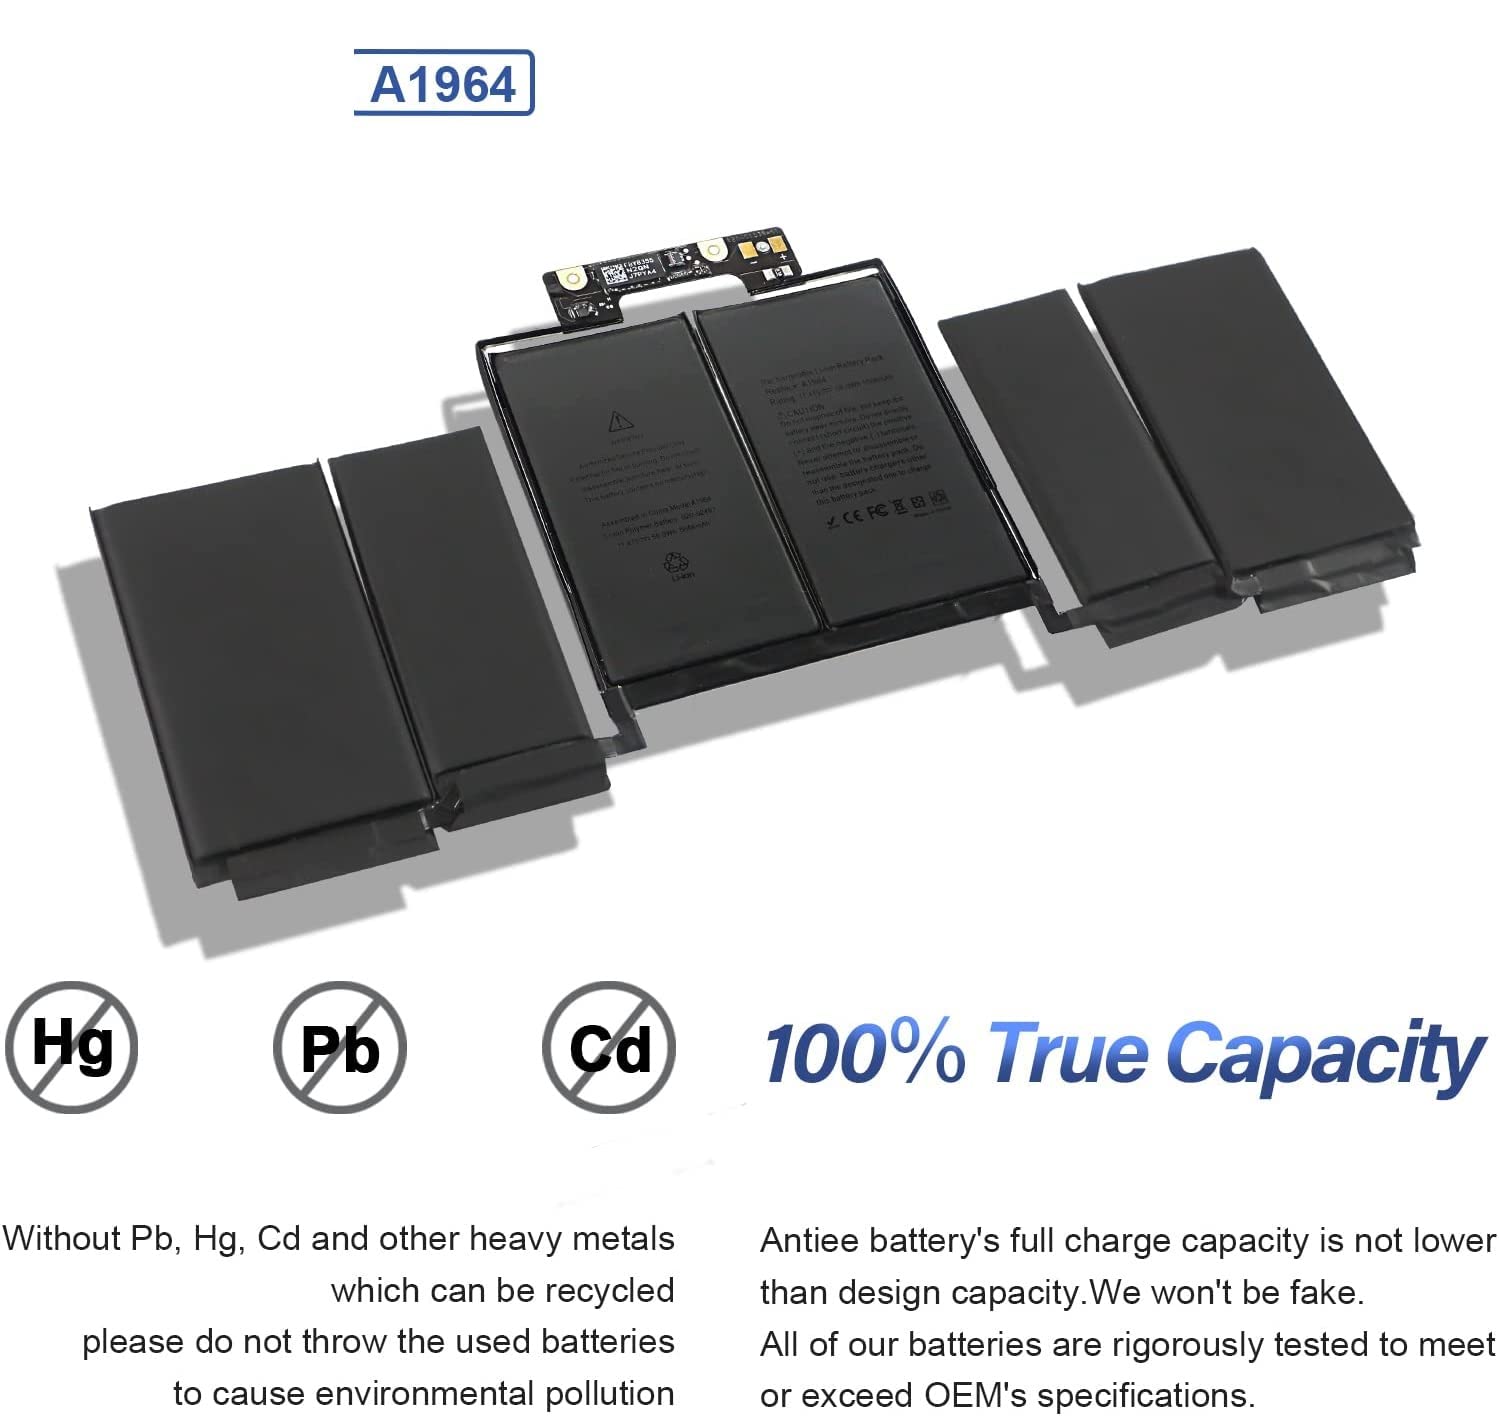 APPLE A1989 Battery Replacement, A1964 Battery for Mac - Book Pro 13" A1989 (Mid 2018 2019) A2251(2020 Release) EMC 3214 3358 3348 MR9Q2LL/A MR9R2LL/A MR9T2LL/A MR9U2LL/A MR9V2LL/A MV962LL/A MV9A2LL/A